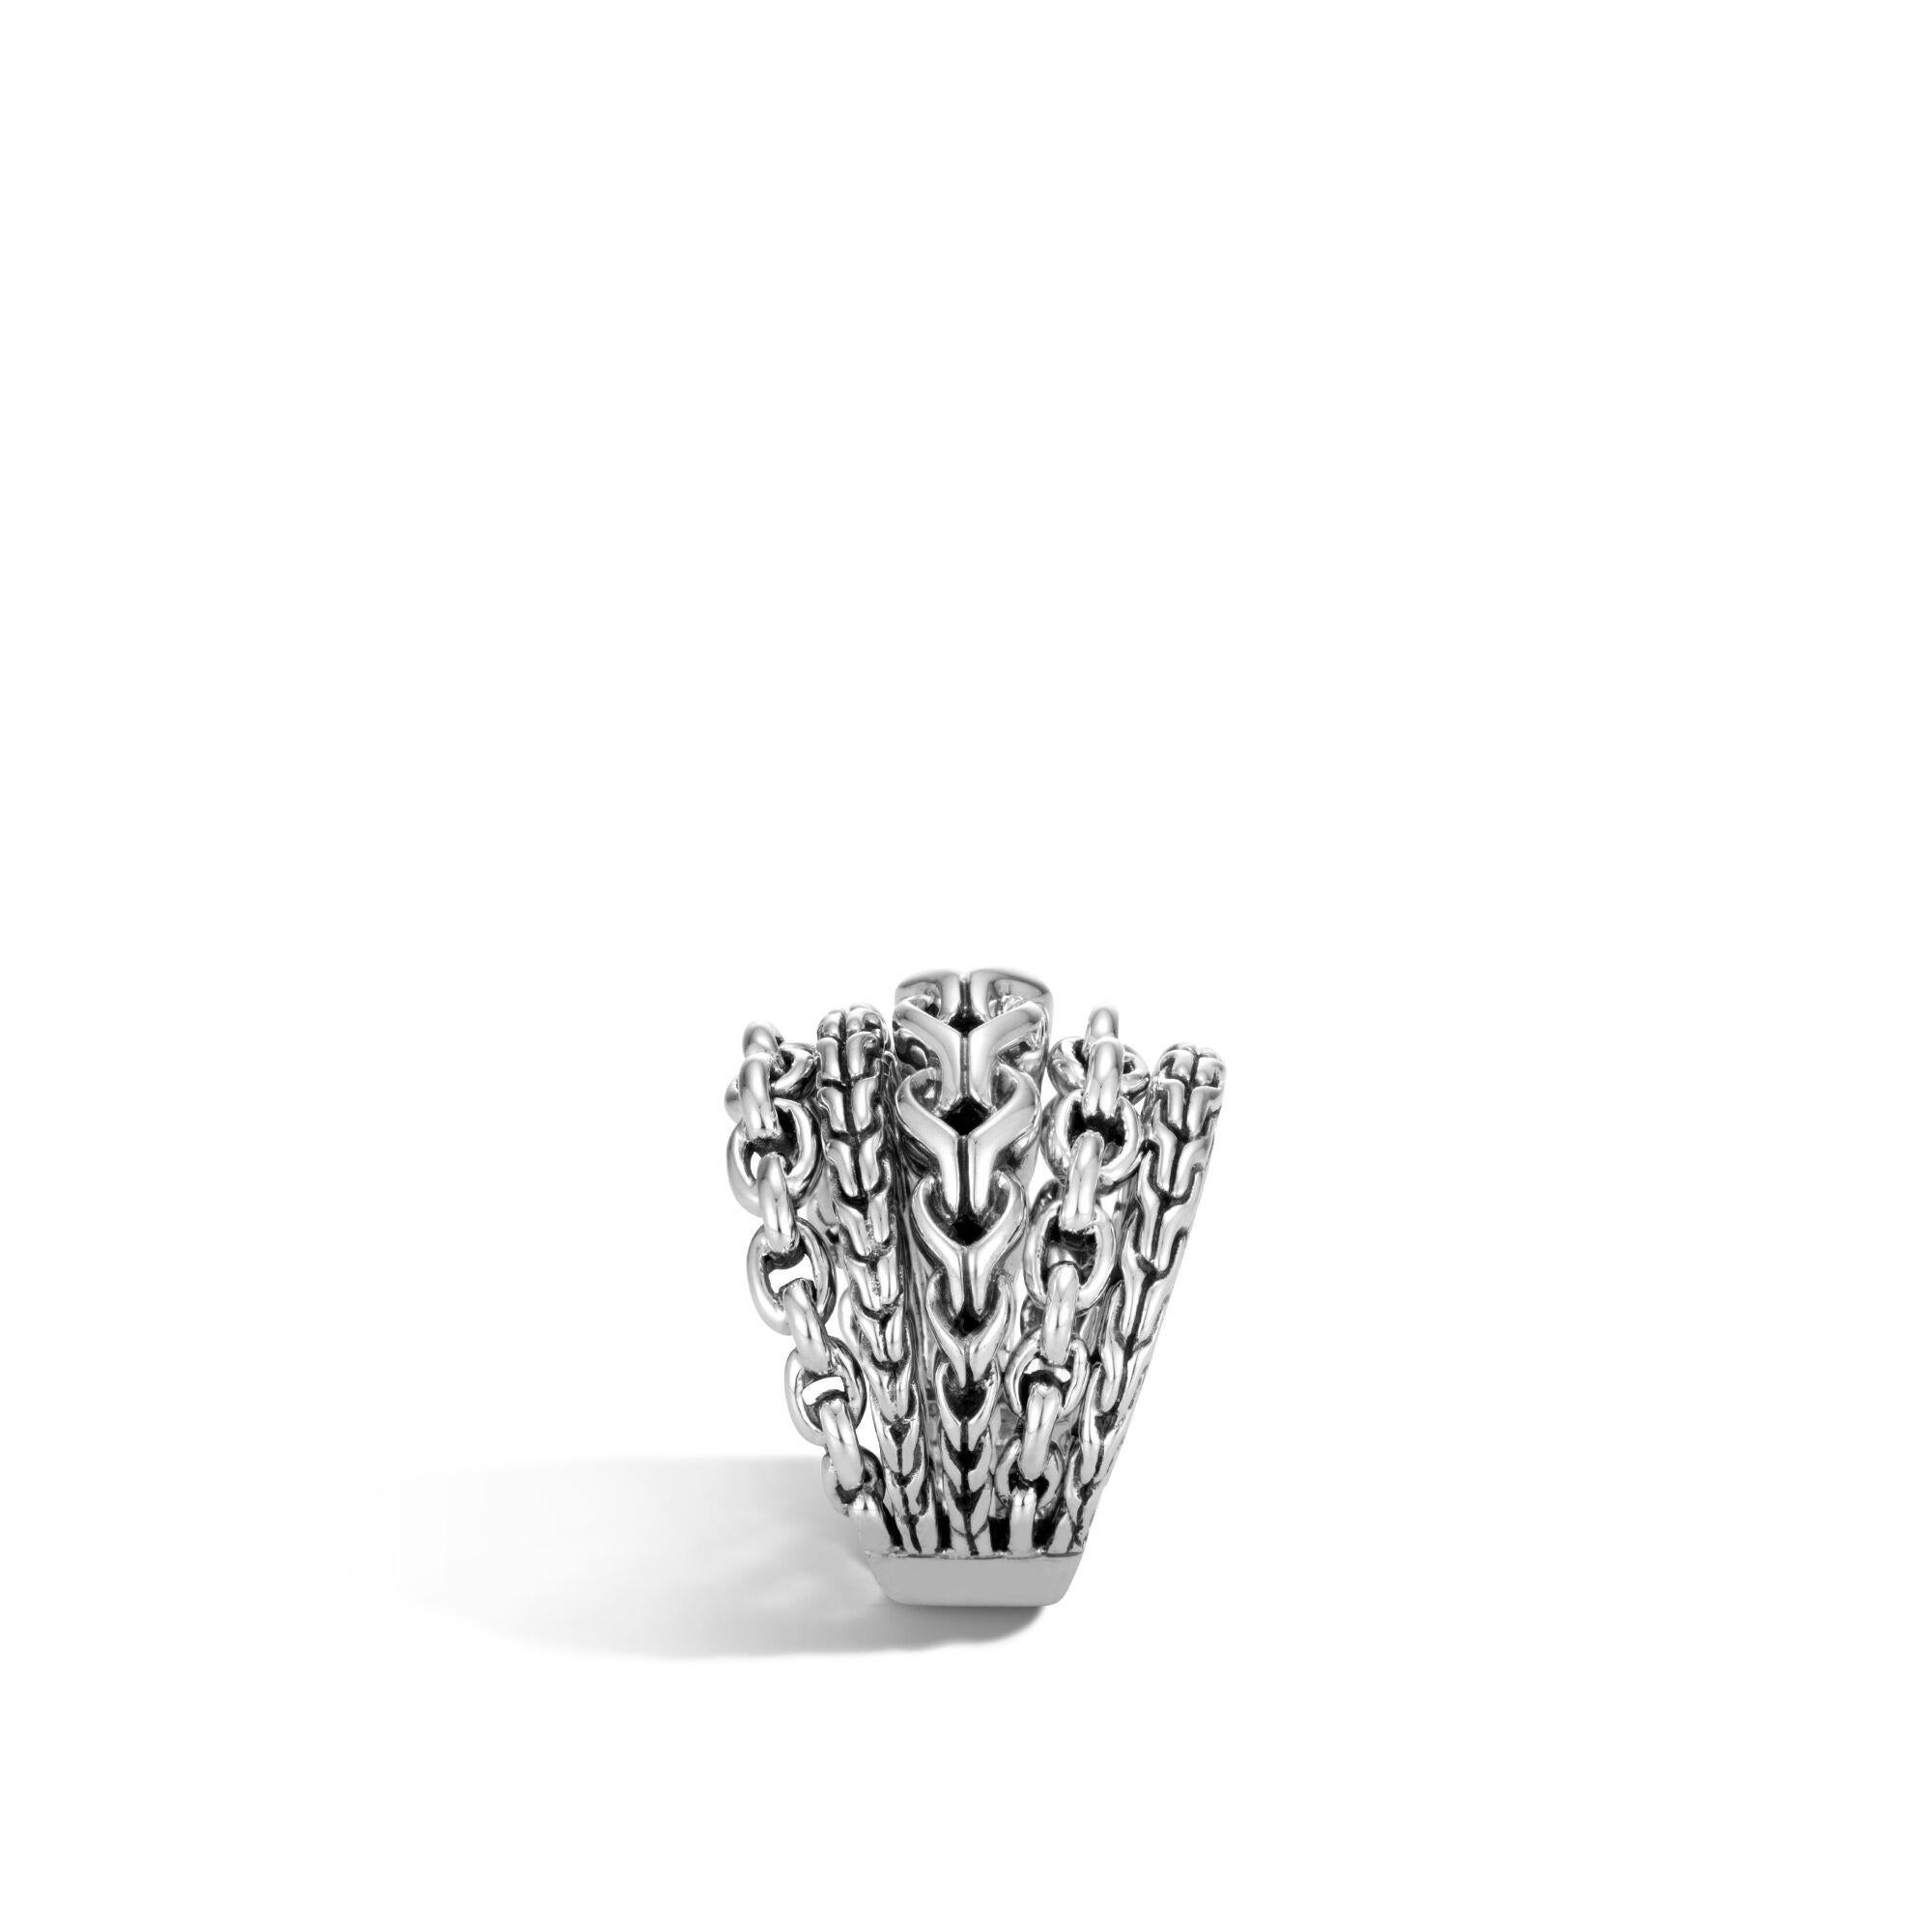 Sterling silver Asli Classic chain link ring. 6mm to 19mm wide. Size 7.